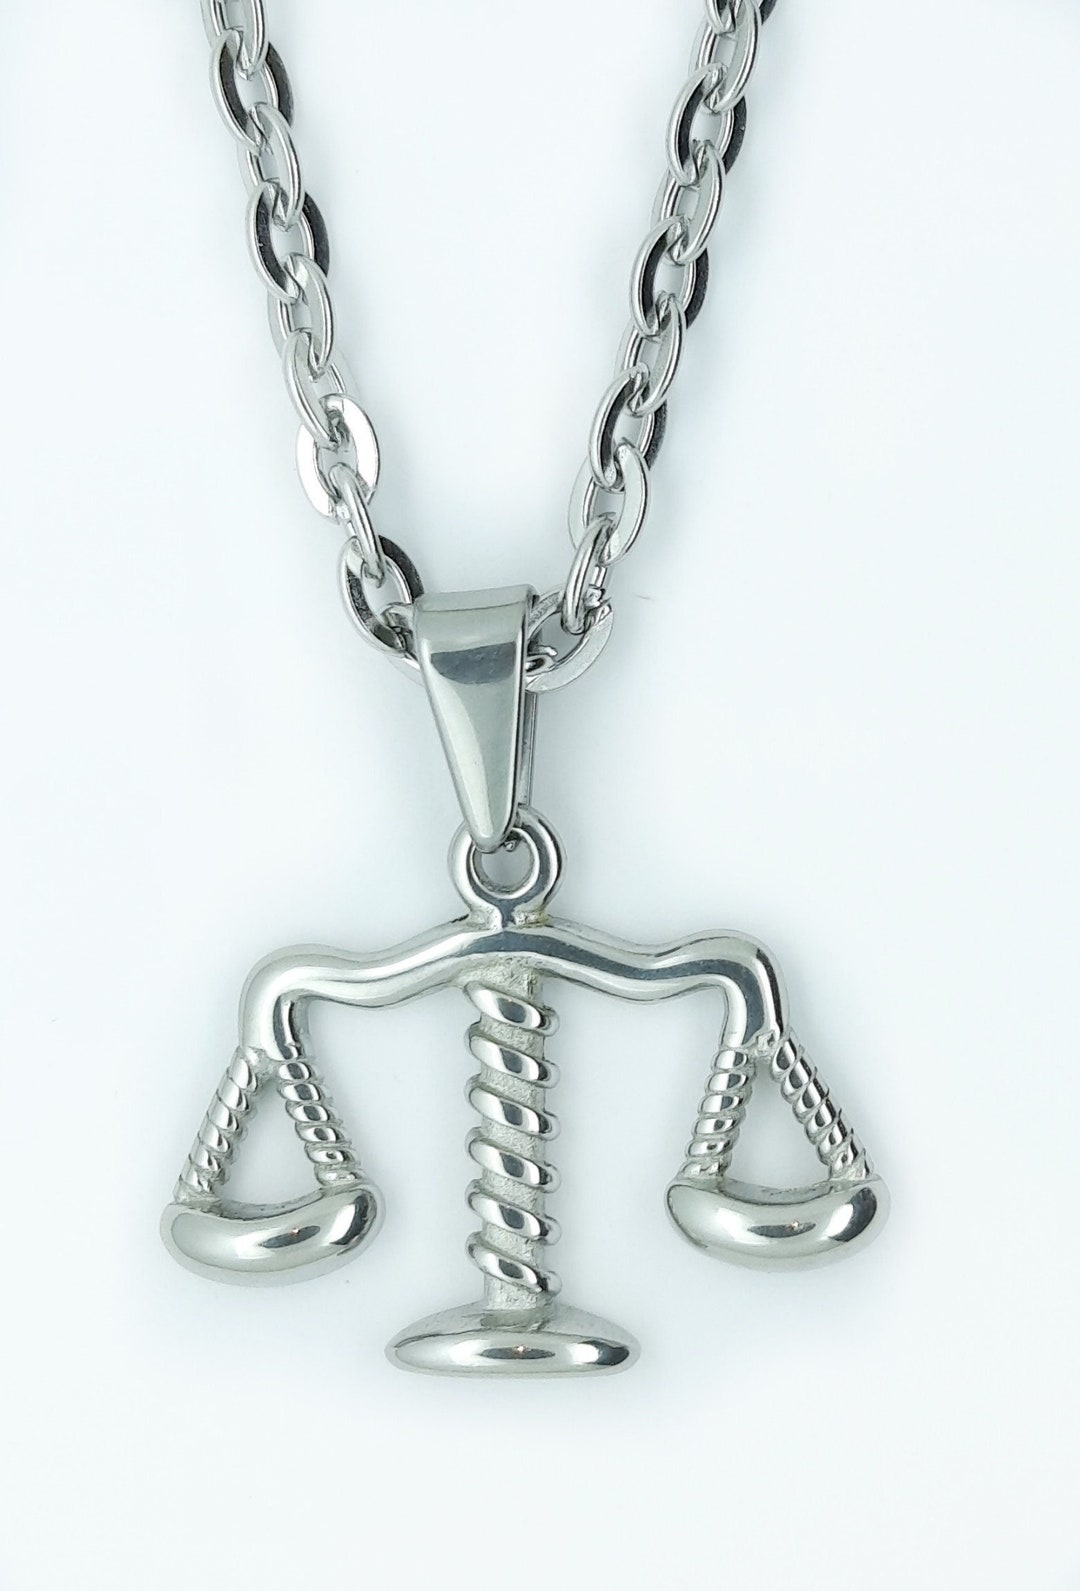 Scales of Justice Pendant Necklace Justitia Silver Pendant - Etsy